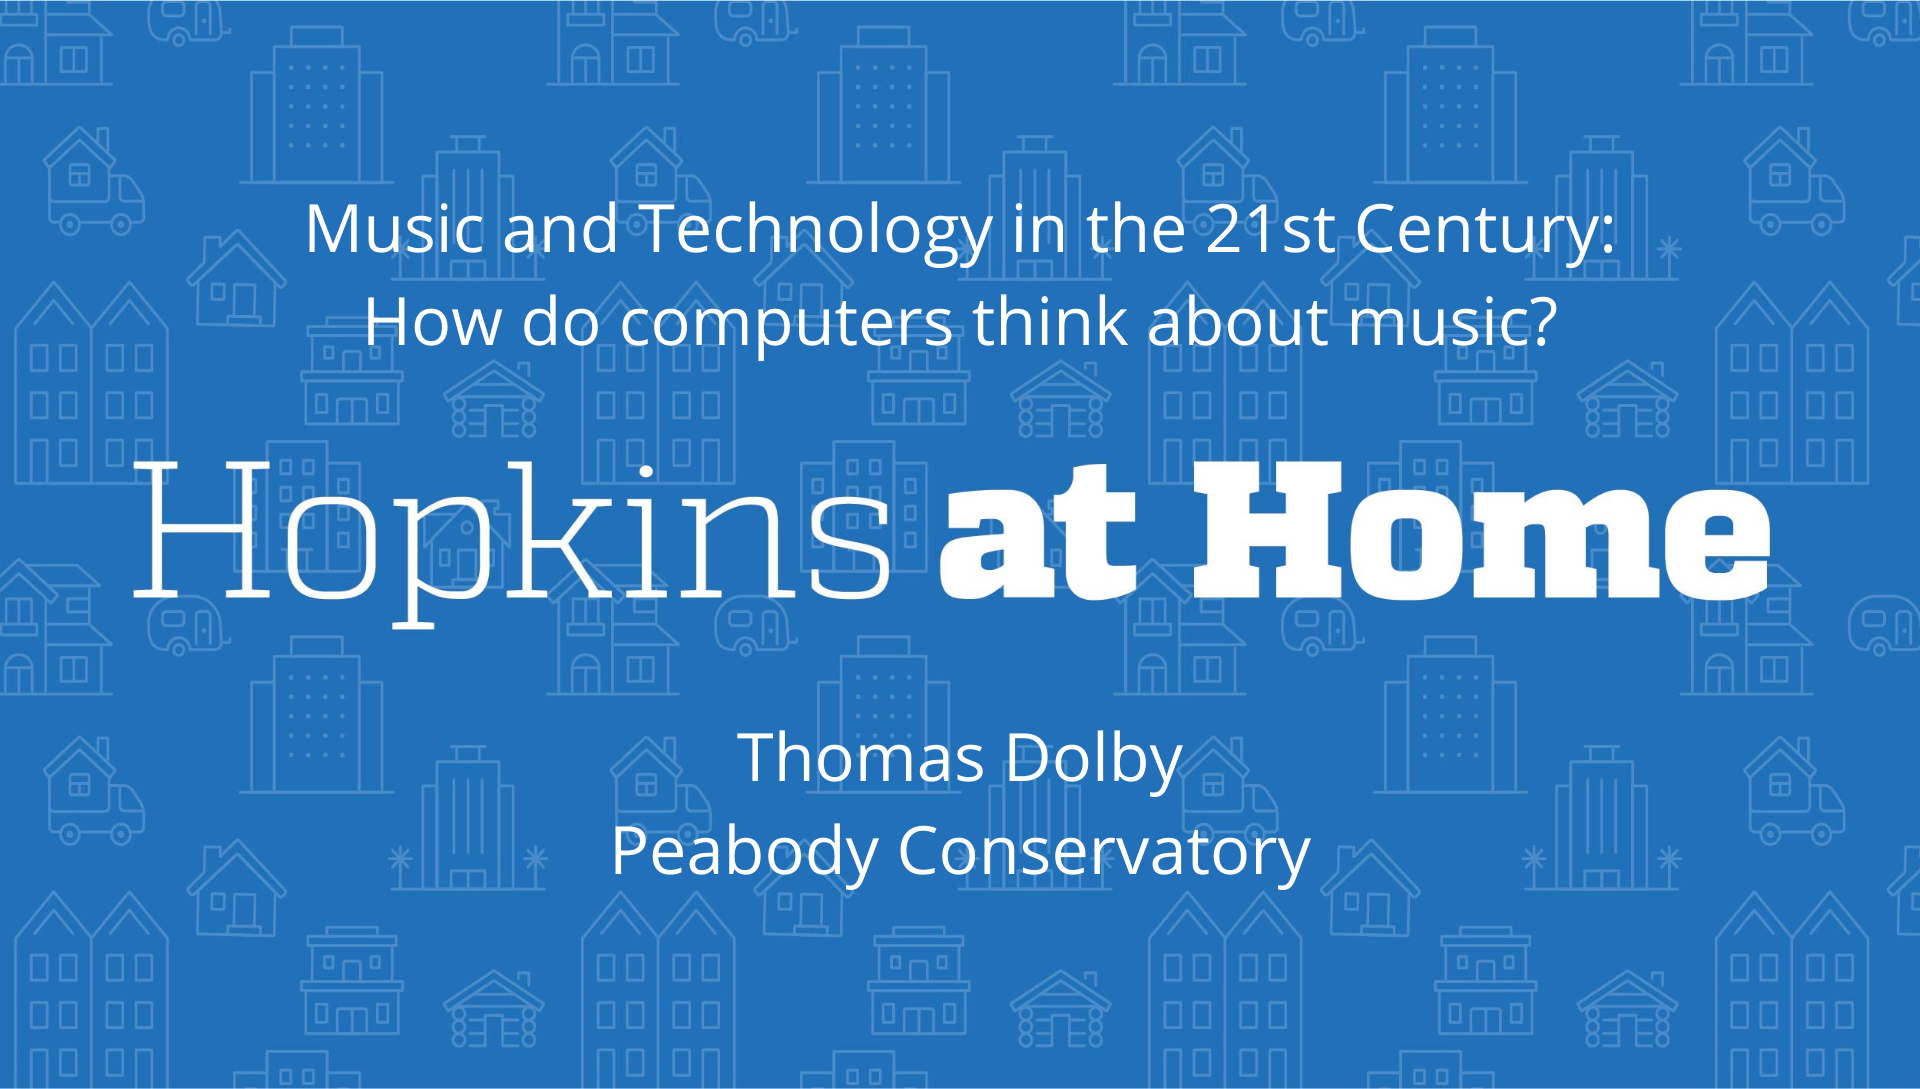 Music and Technology in the 21st Century: How do computers think about music?